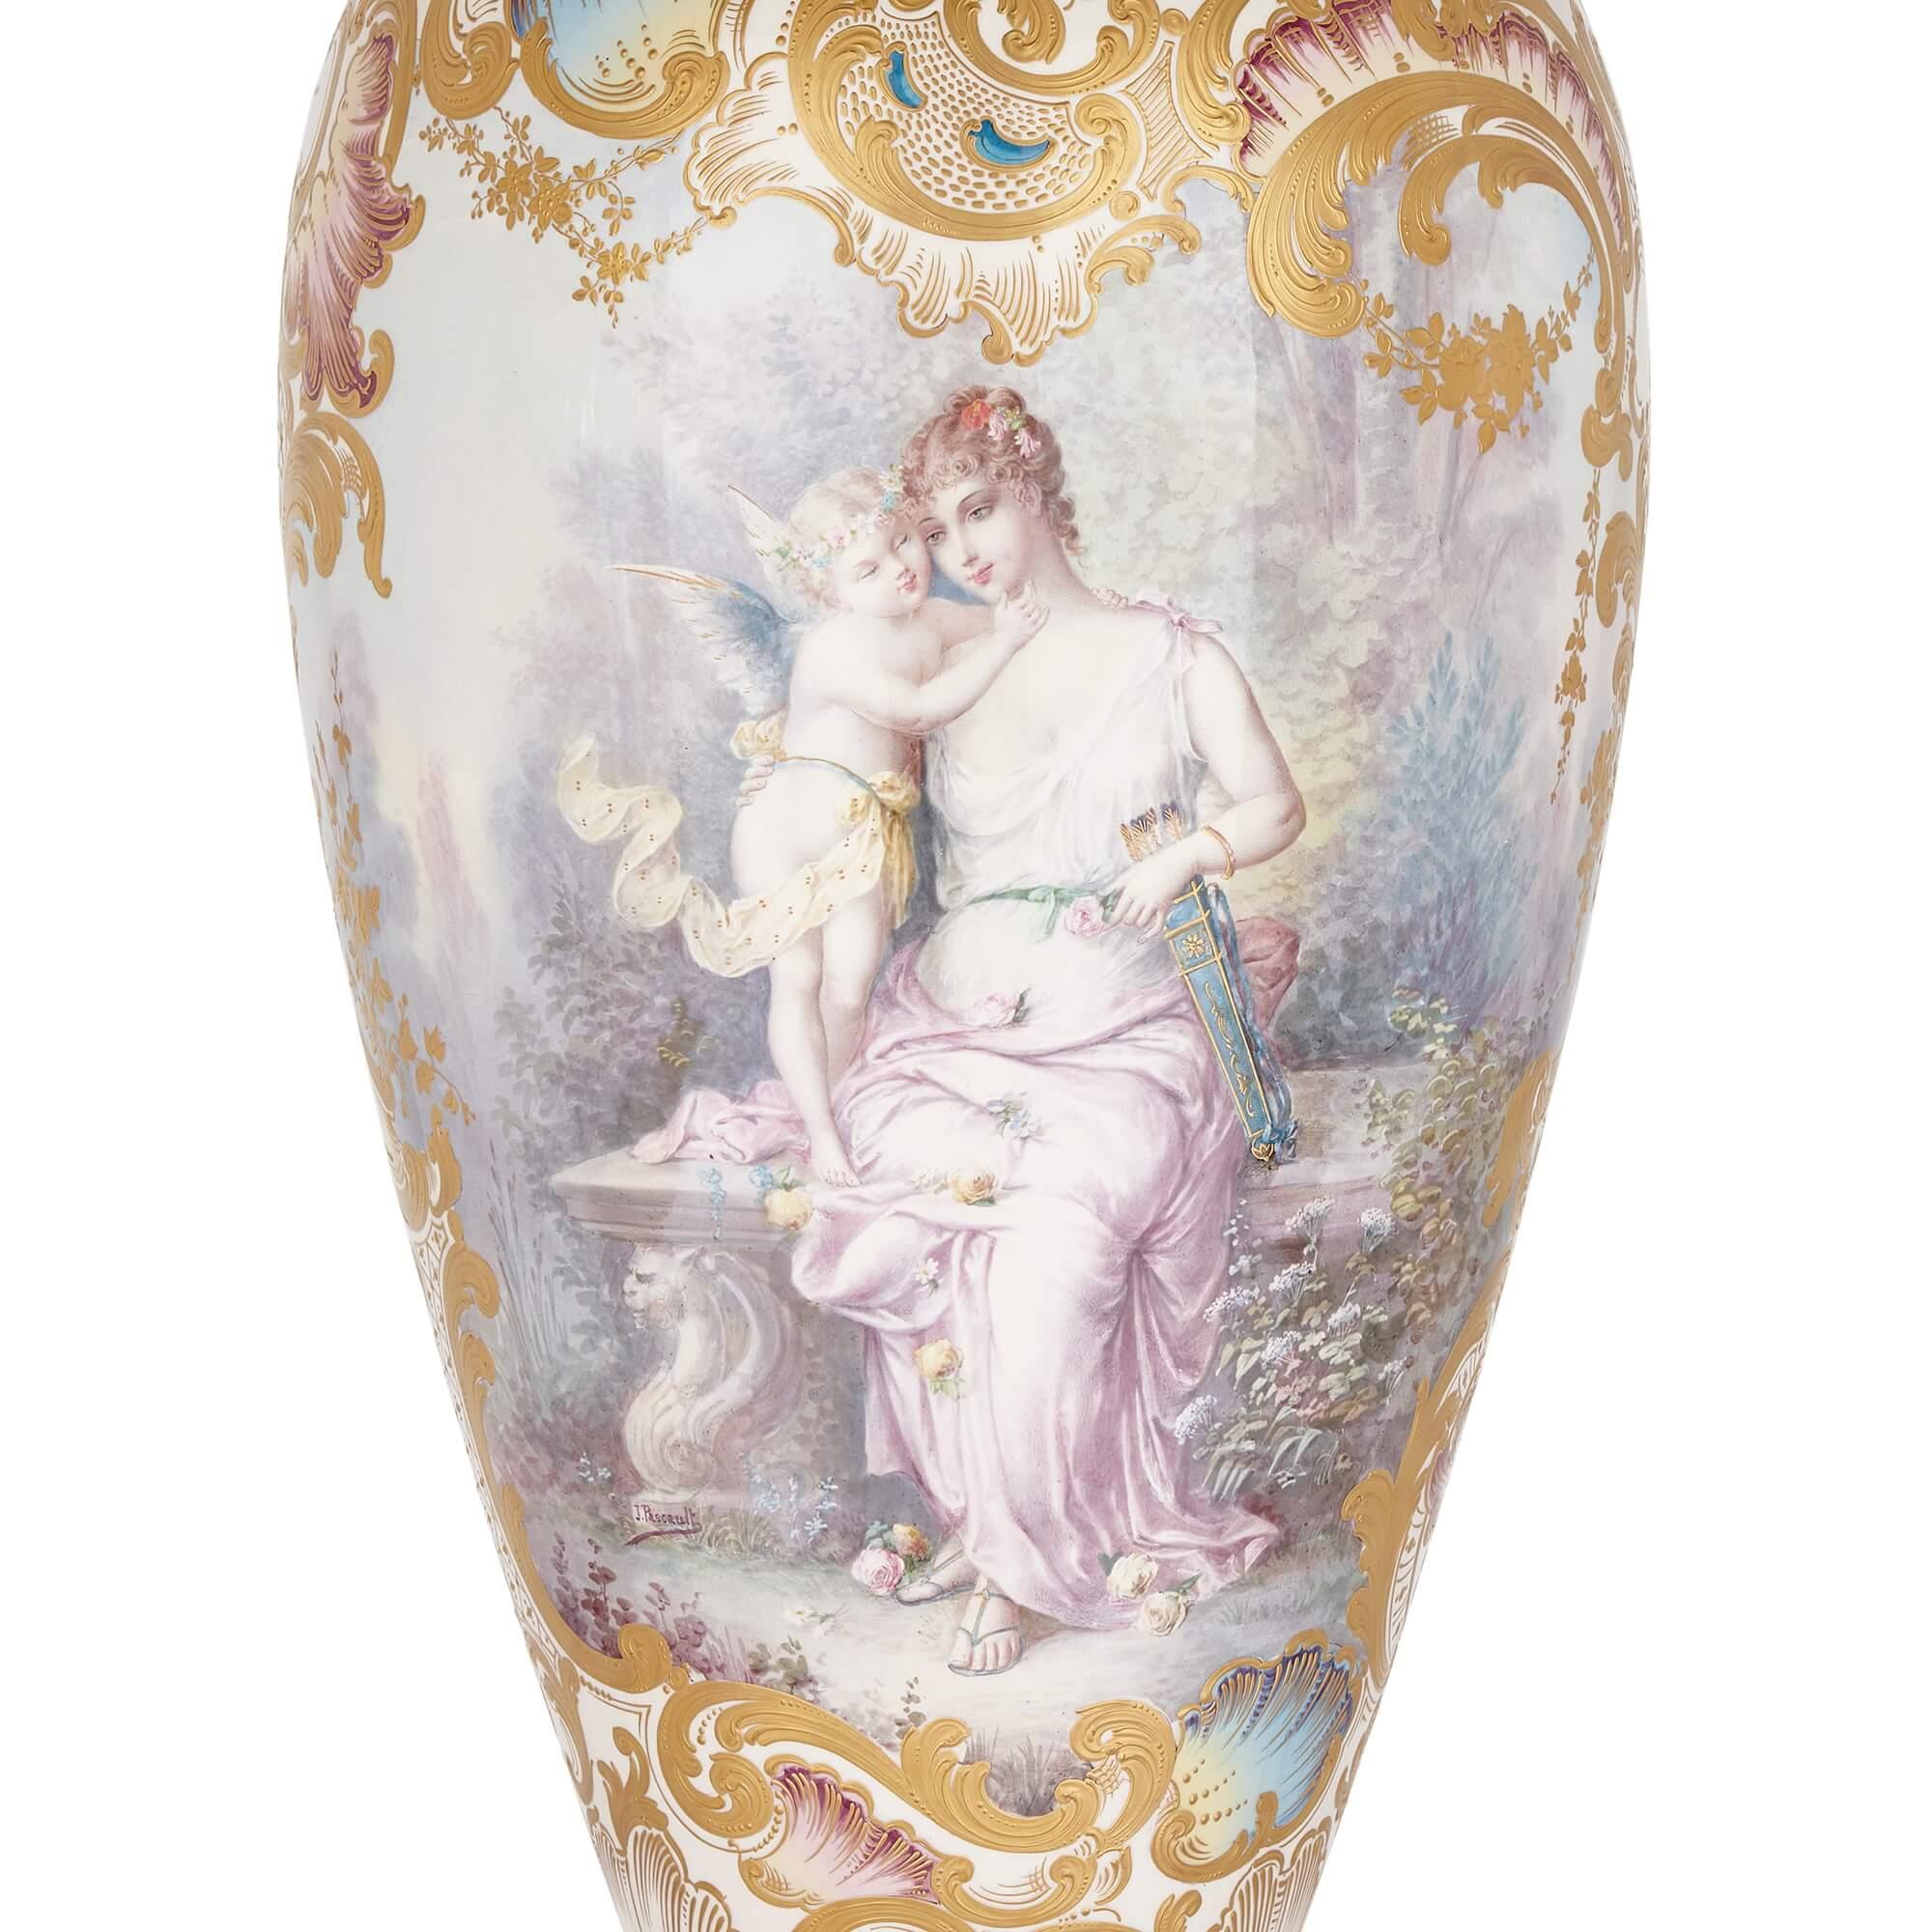 Very large antique French Sèvres style porcelain vase
French, Late 19th Century
Height 154cm, diameter 41cm

This fantastic vase is the work of J. Pascault, a famed porcelain artist of the late 19th Century who specialised in the production of